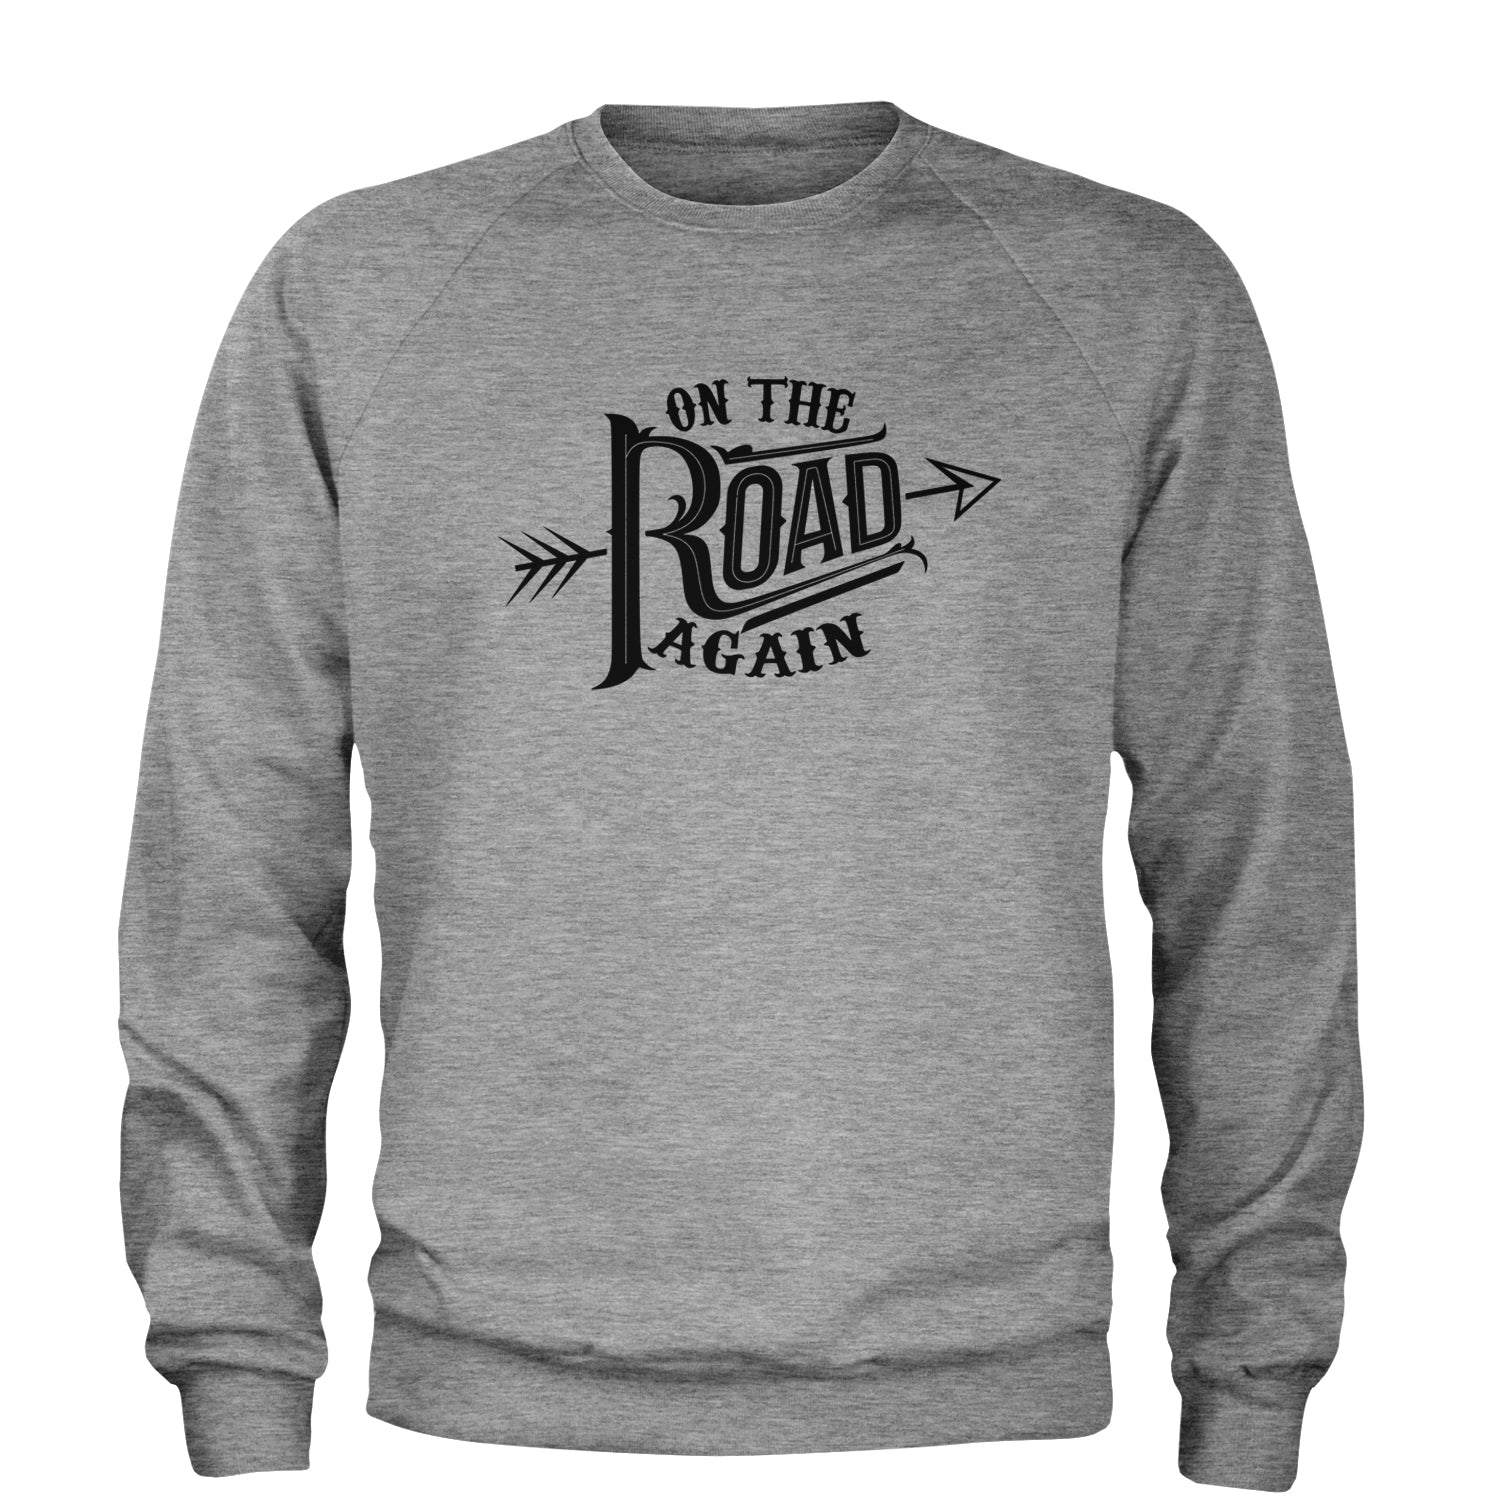 On The Road Again Hippy Country Music Adult Crewneck Sweatshirt